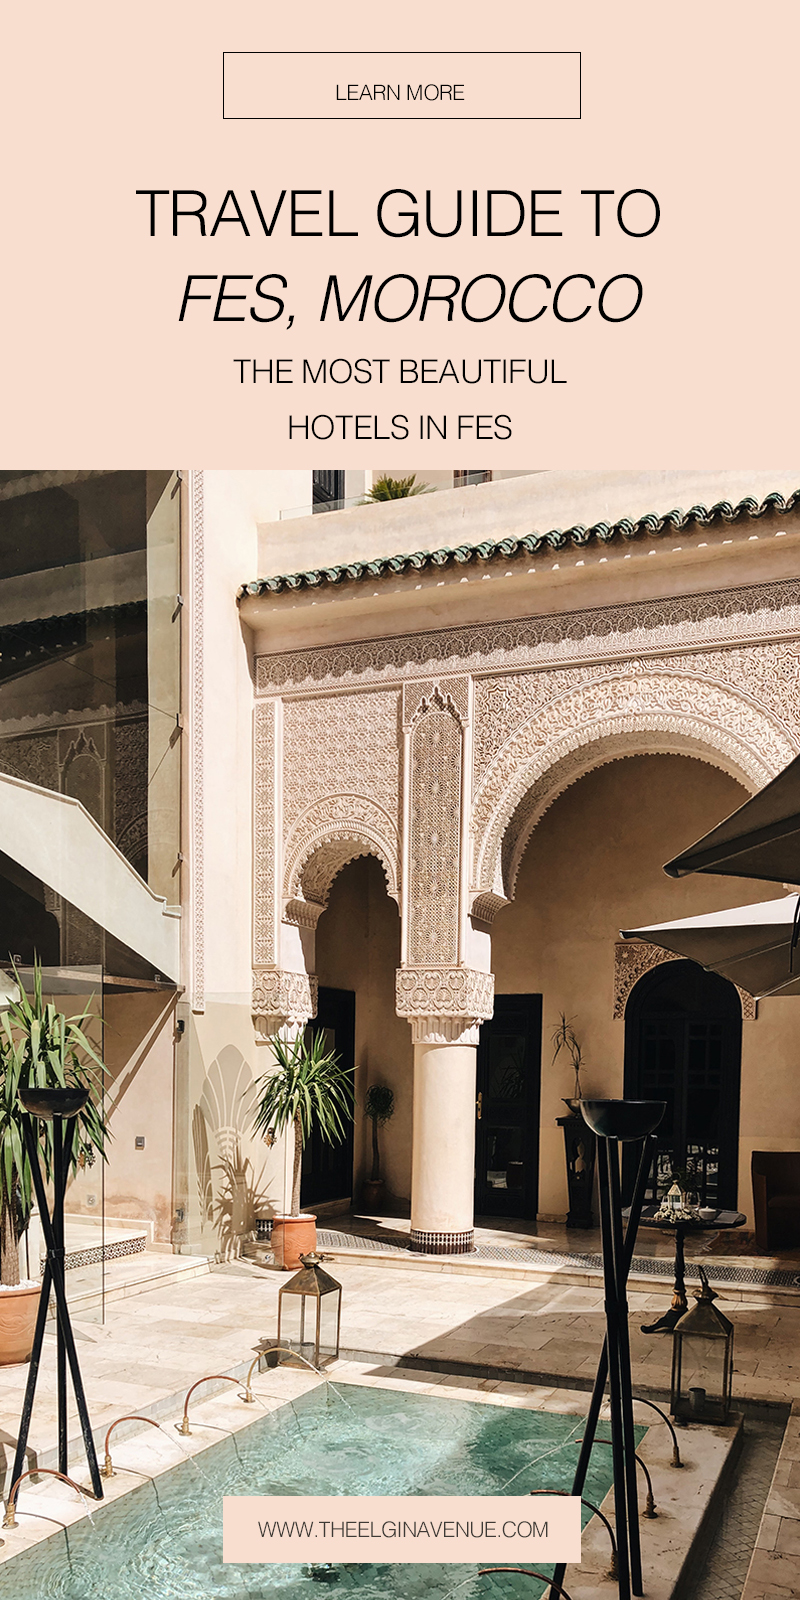 The Most Beautiful Hotels in Fes Morocco